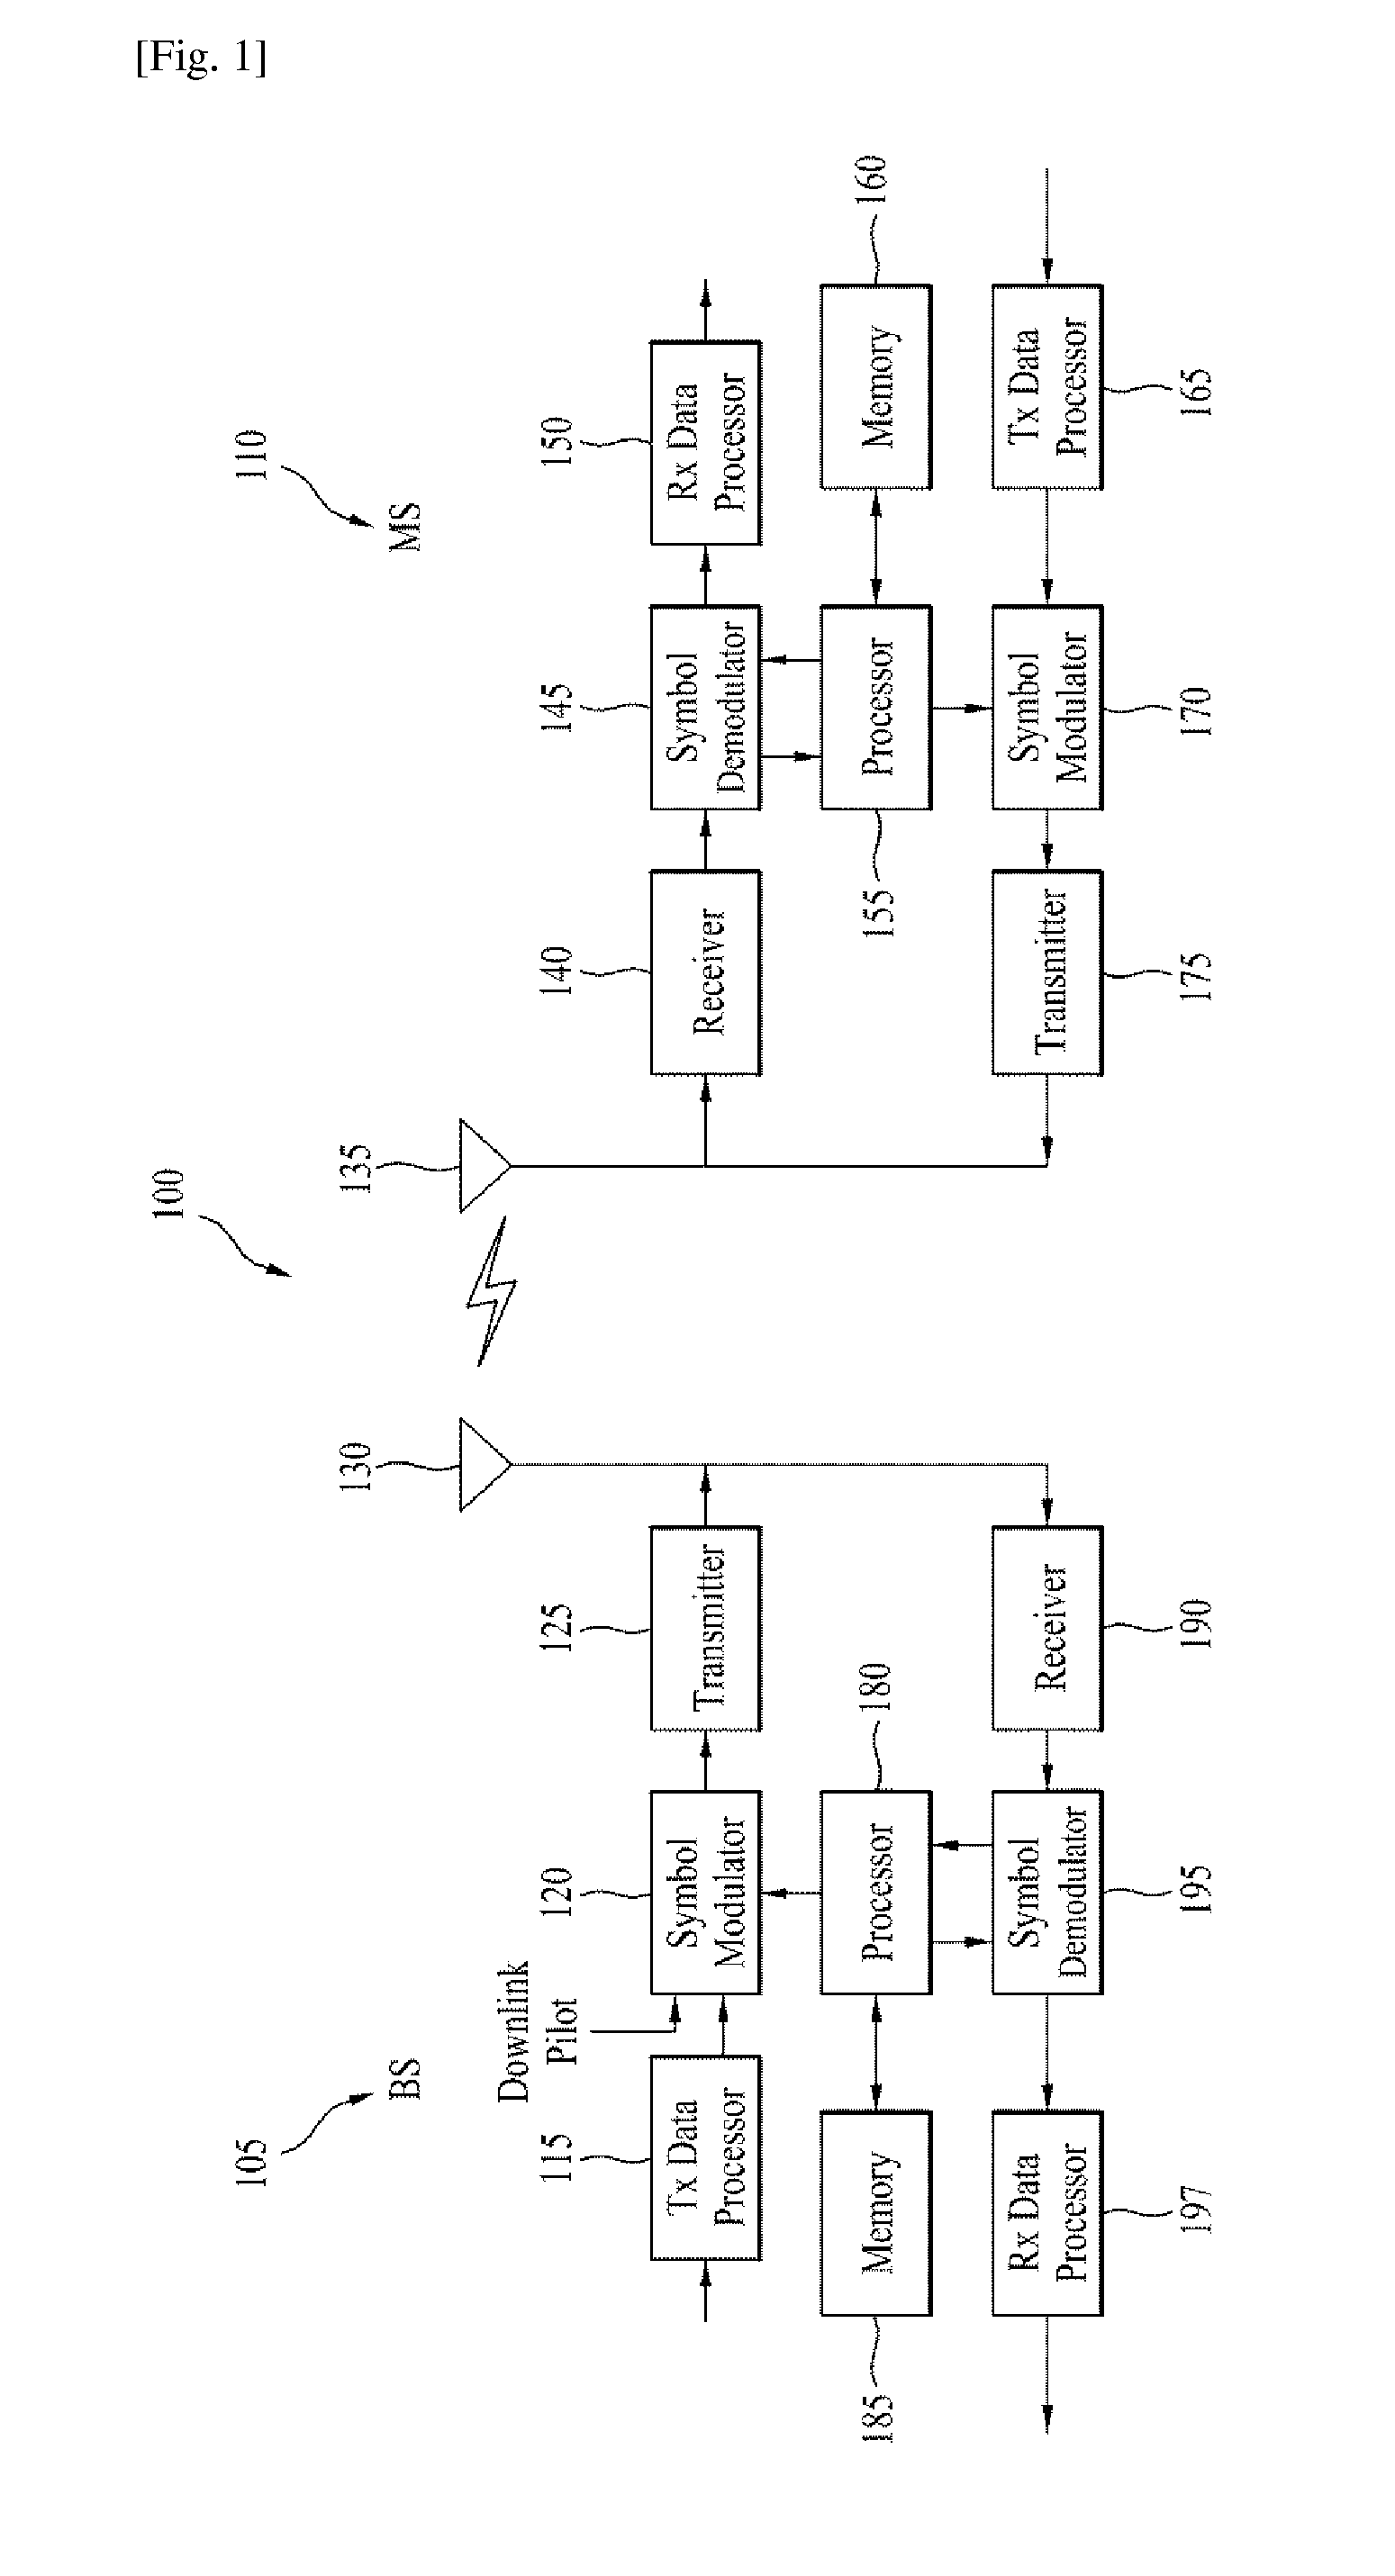 Method and apparatus for performing tracking area update (TAU) by user equipment (UE) in c-ran system